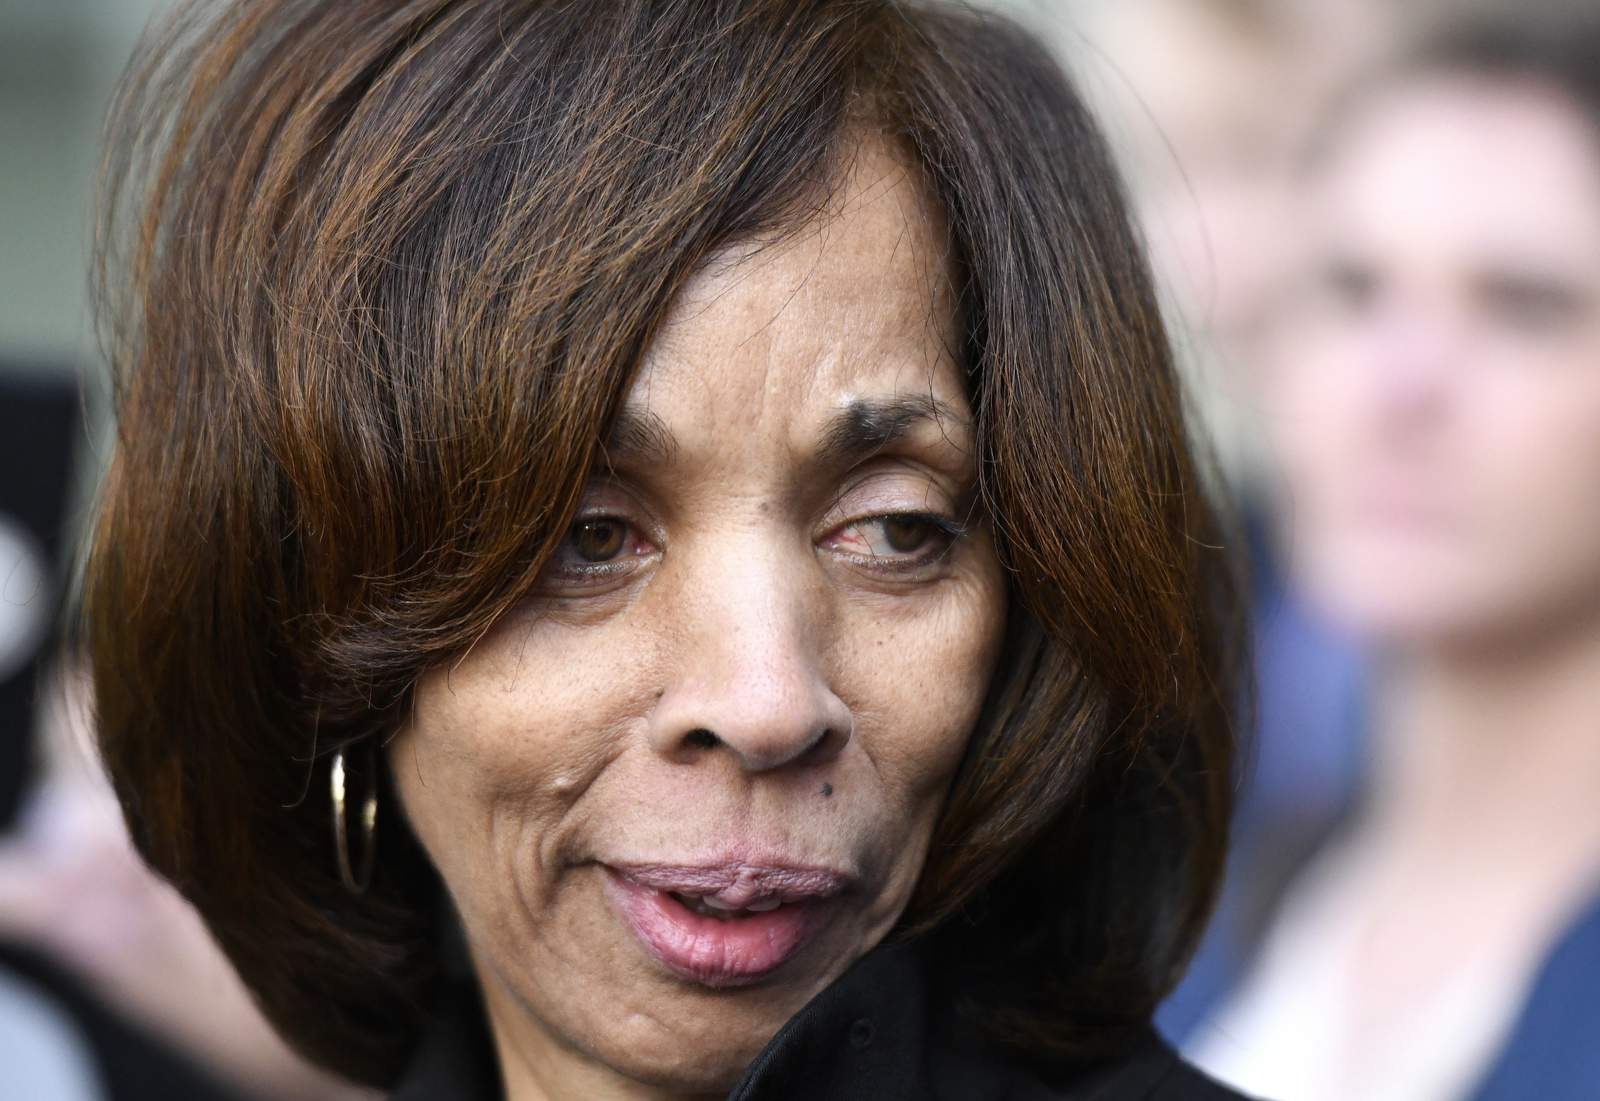 Former Baltimore mayor scheduled to plead guilty to perjury